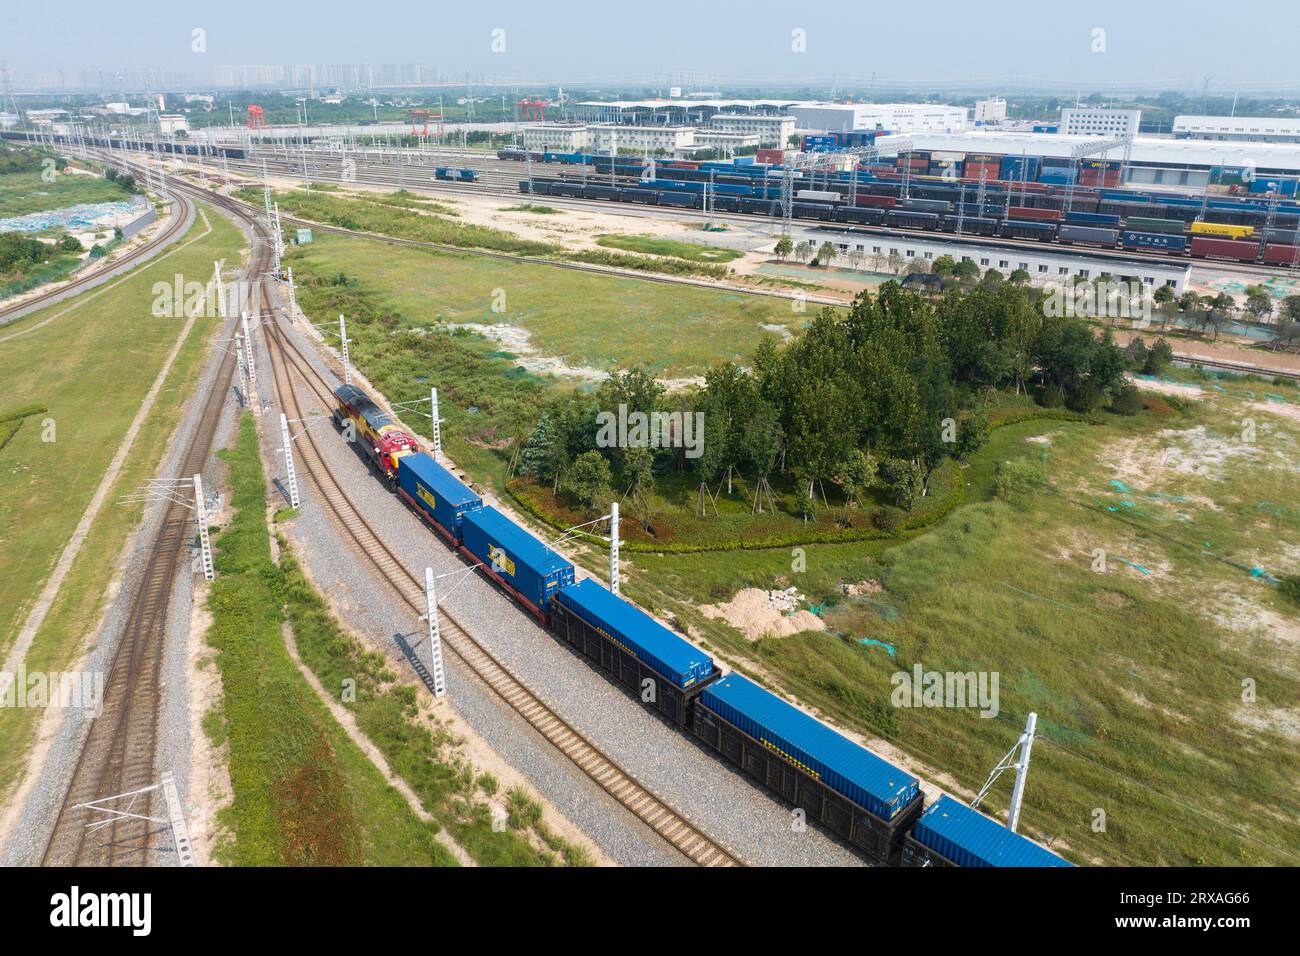 Xi'an. 7th Sep, 2023. This aerial photo taken on Sept. 7, 2023 shows a Chang'an China-Europe freight train departing from Xi'an International Port in Xi'an, northwest China's Shaanxi Province. The Chang'an China-Europe freight train service was launched in 2013, when China proposed the Belt and Road Initiative. In the past ten years, Xi'an International Port, the starting station of the Chang'an China-Europe freight trains, has been developed from a small cargo station to an international logistic hub. Credit: Shao Rui/Xinhua/Alamy Live News Stock Photo